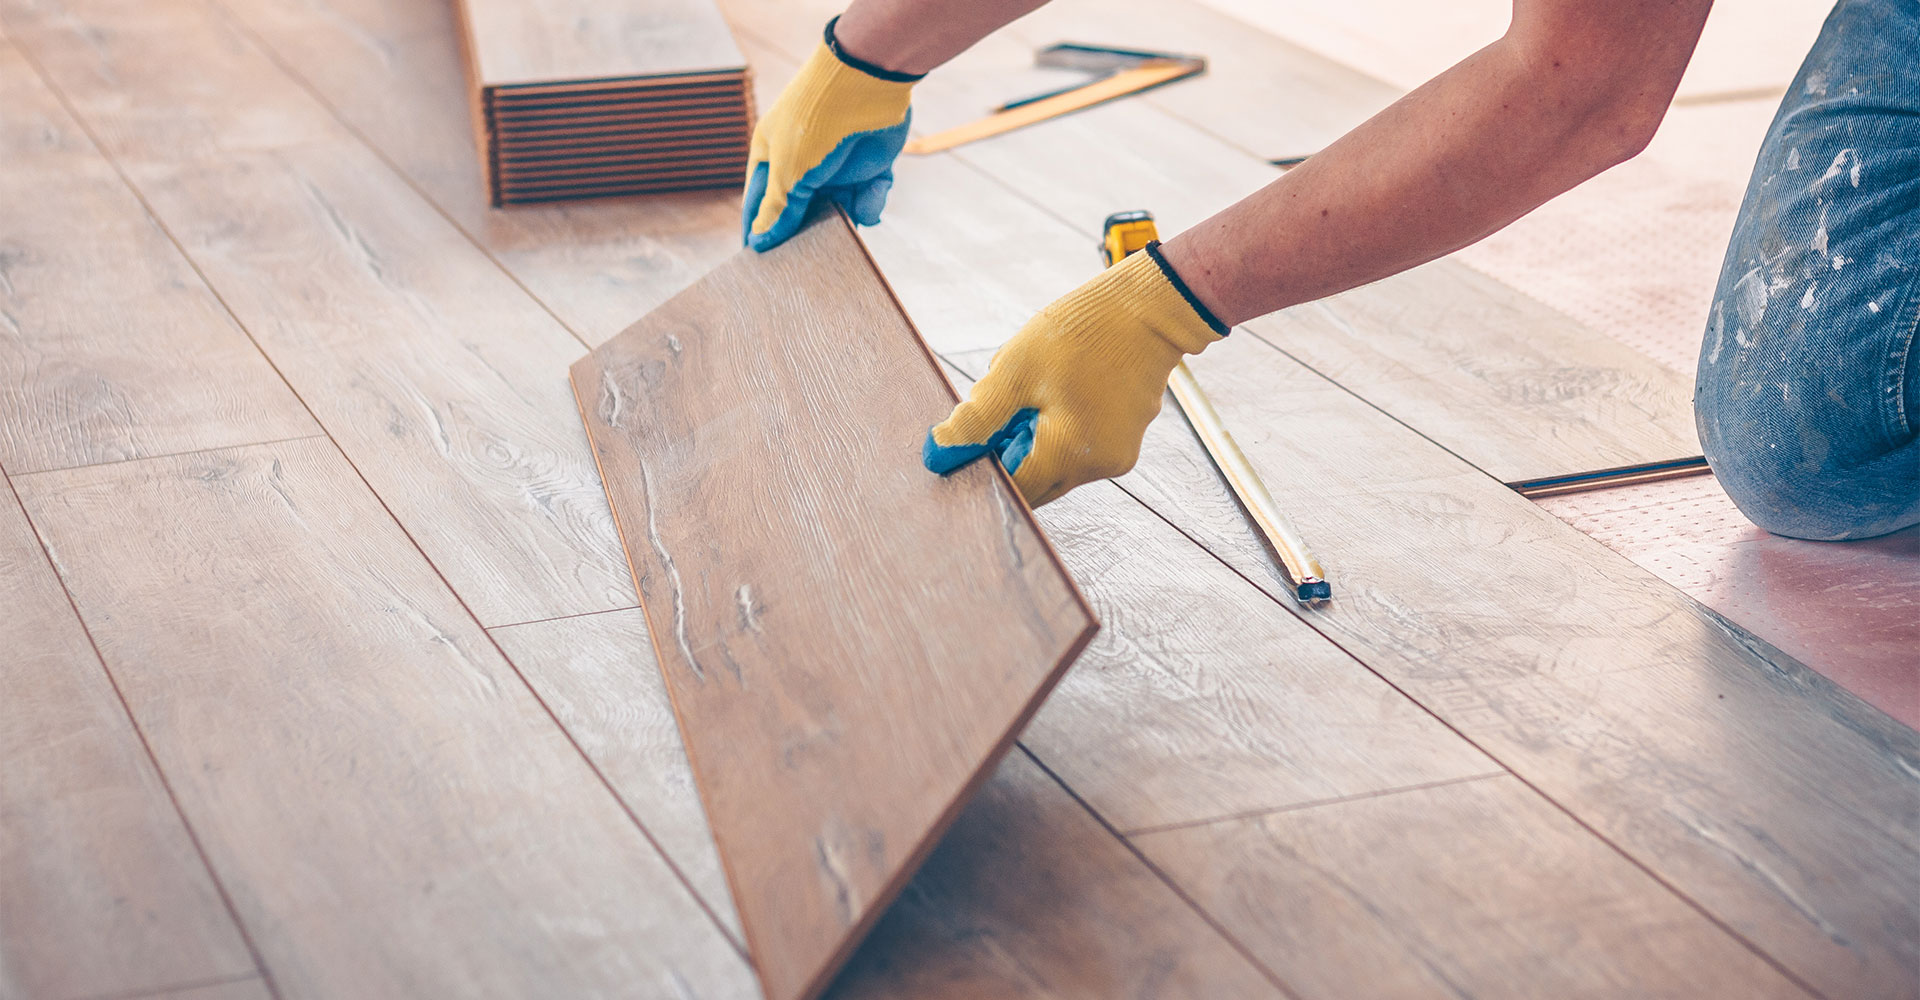 Top flooring companies in the world